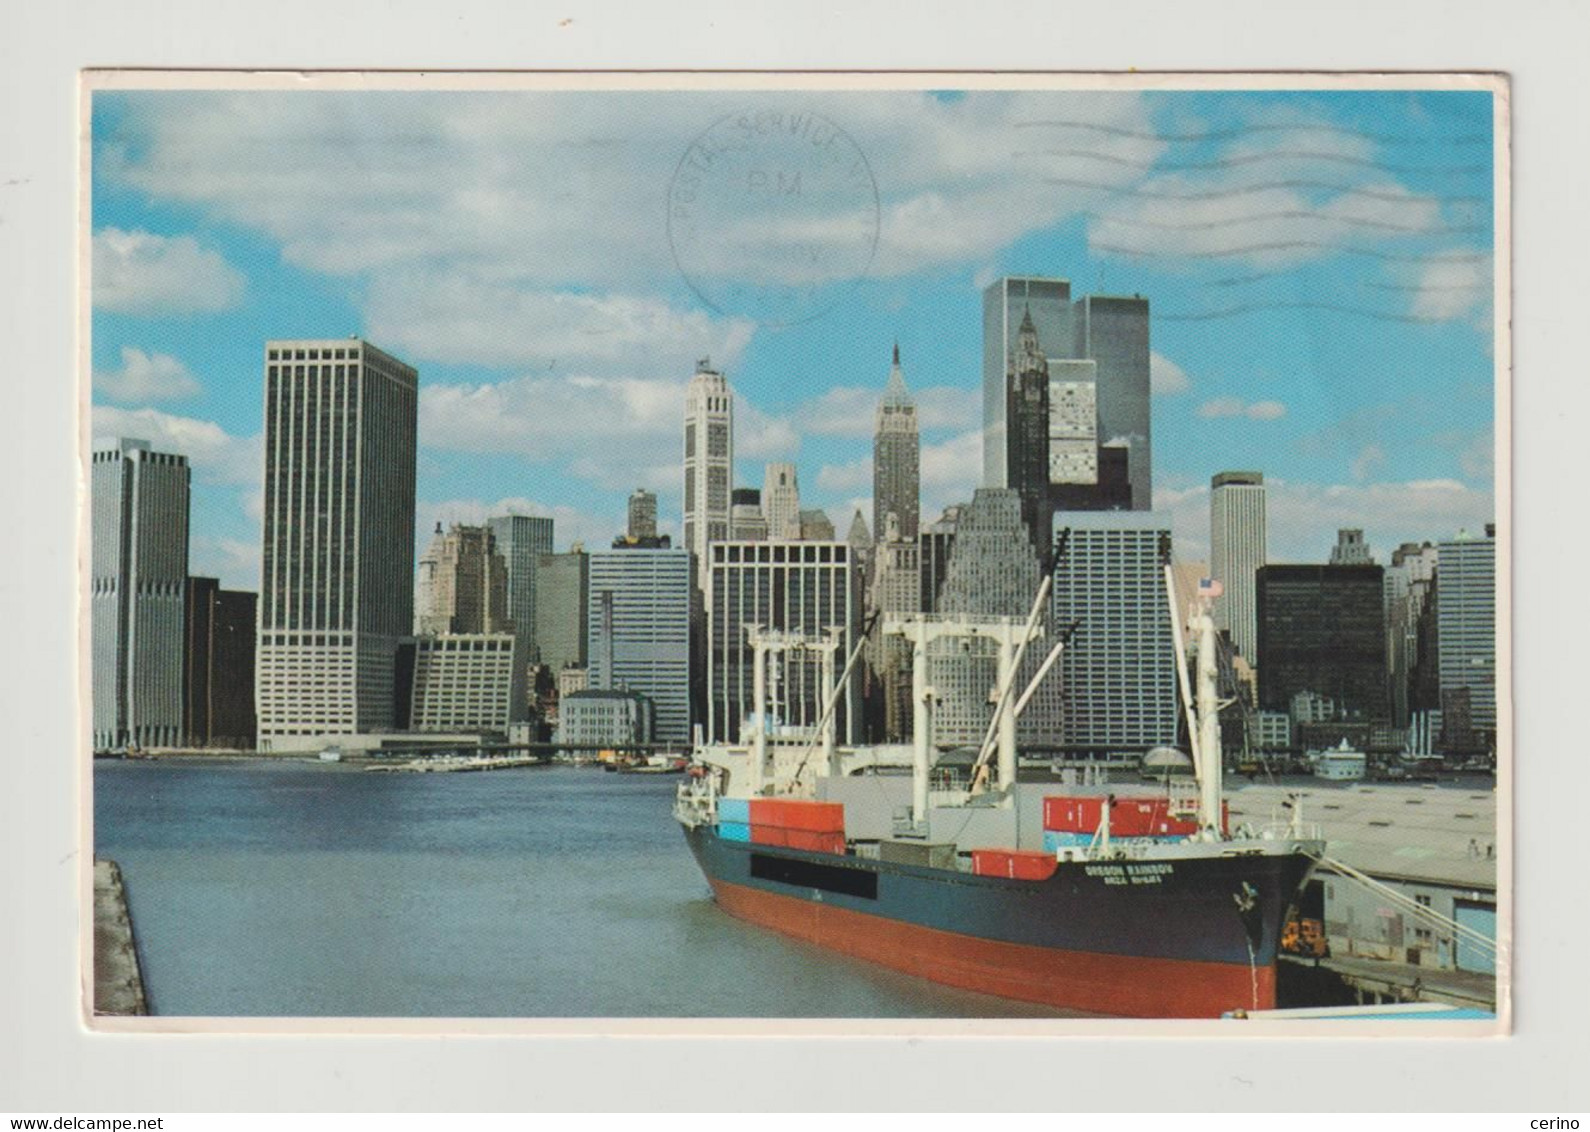 NEW  YORK  CITY:  OCEAN  FREIGHTER  DOCKED  AT  A  BROOKLYN  PIER ...-  STAMP  REMOVED  -  TO  ITALY  -  FG - Puentes Y Túneles